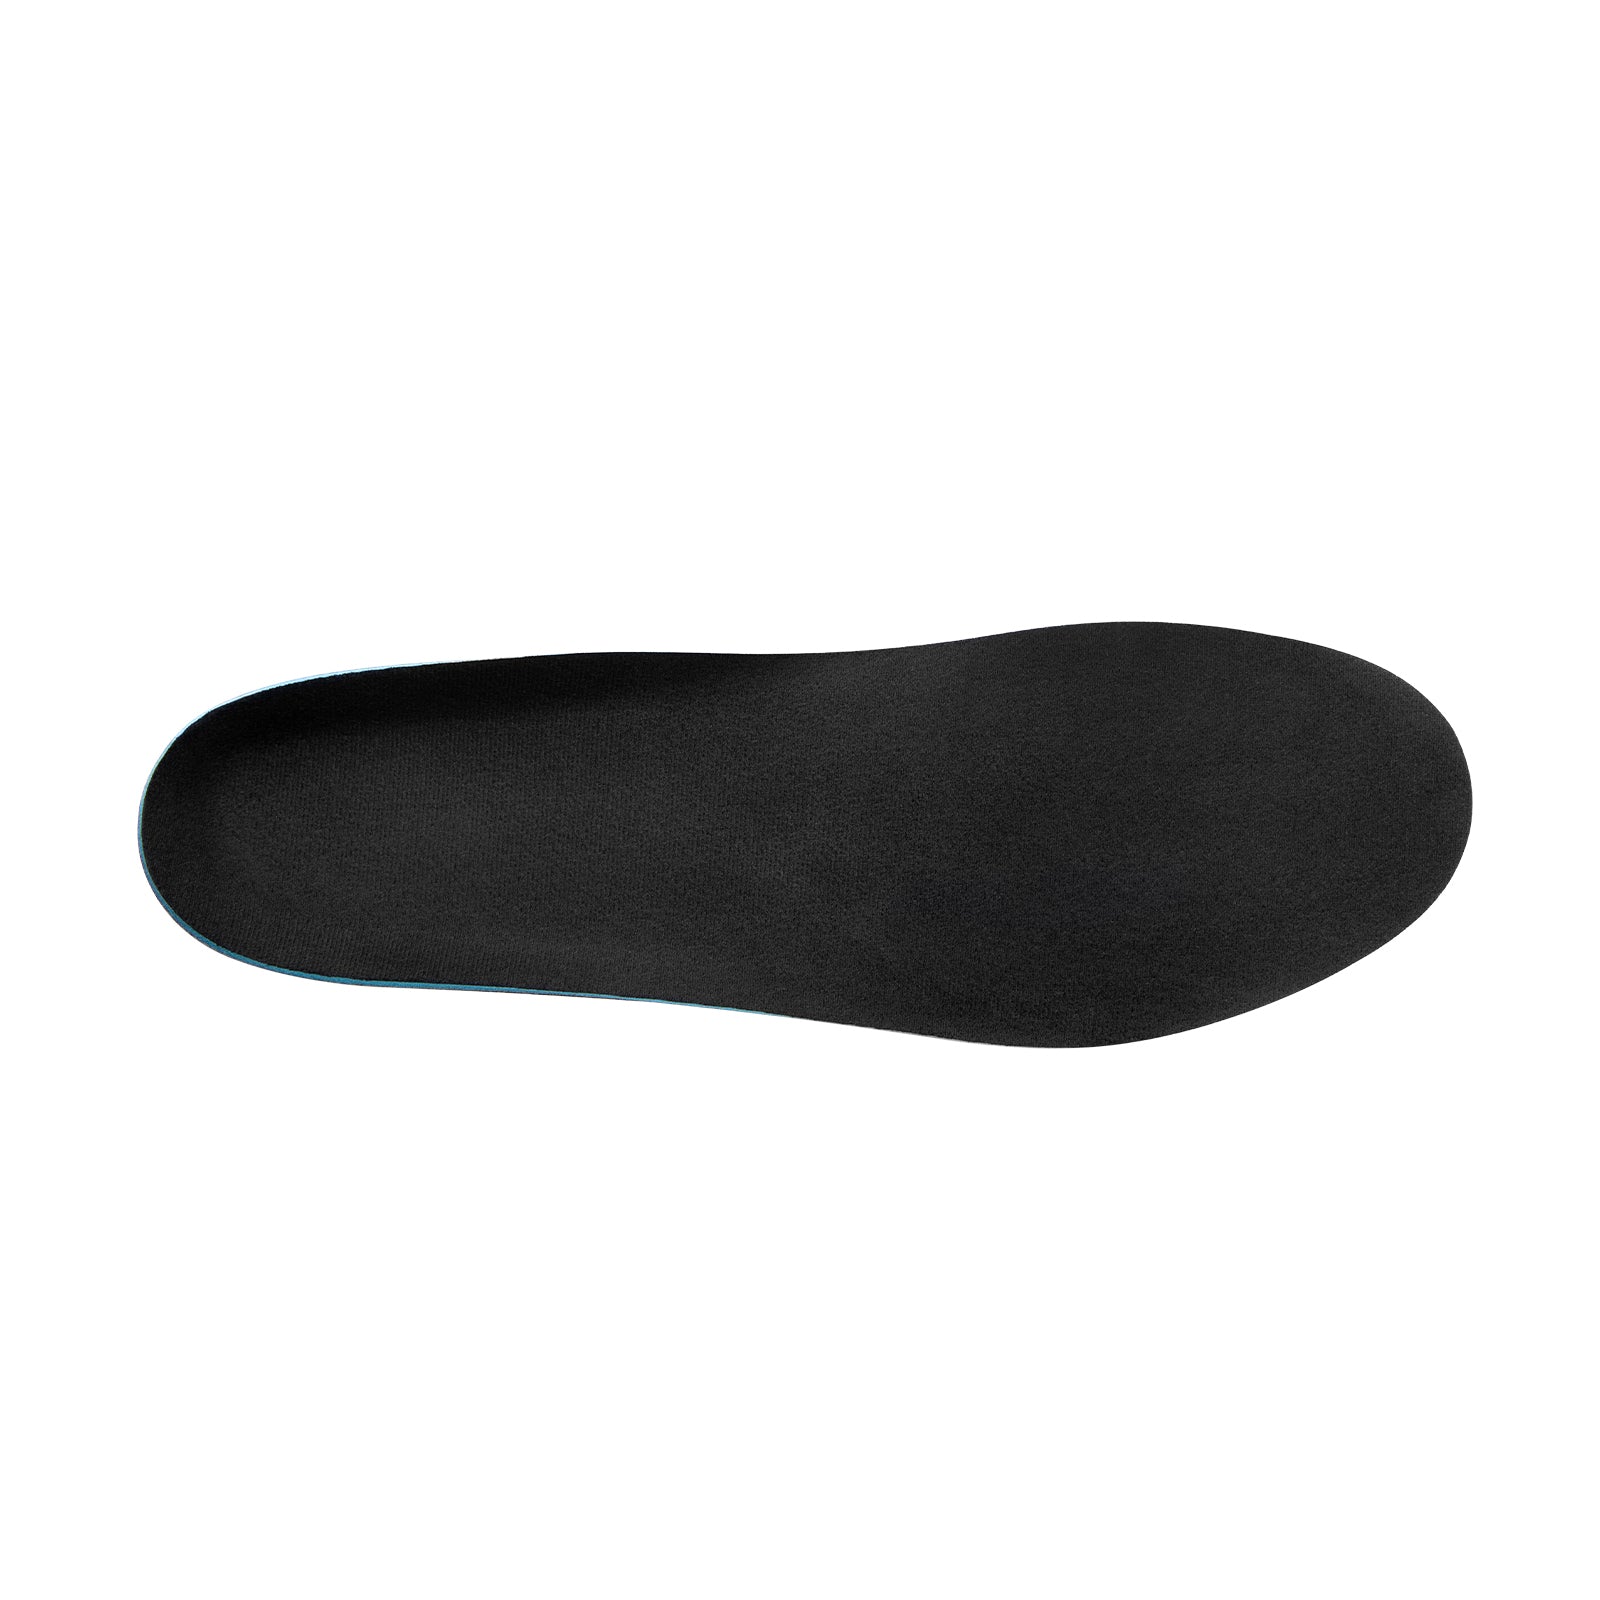 Shock Absorber Insoles | Outdoor Master®